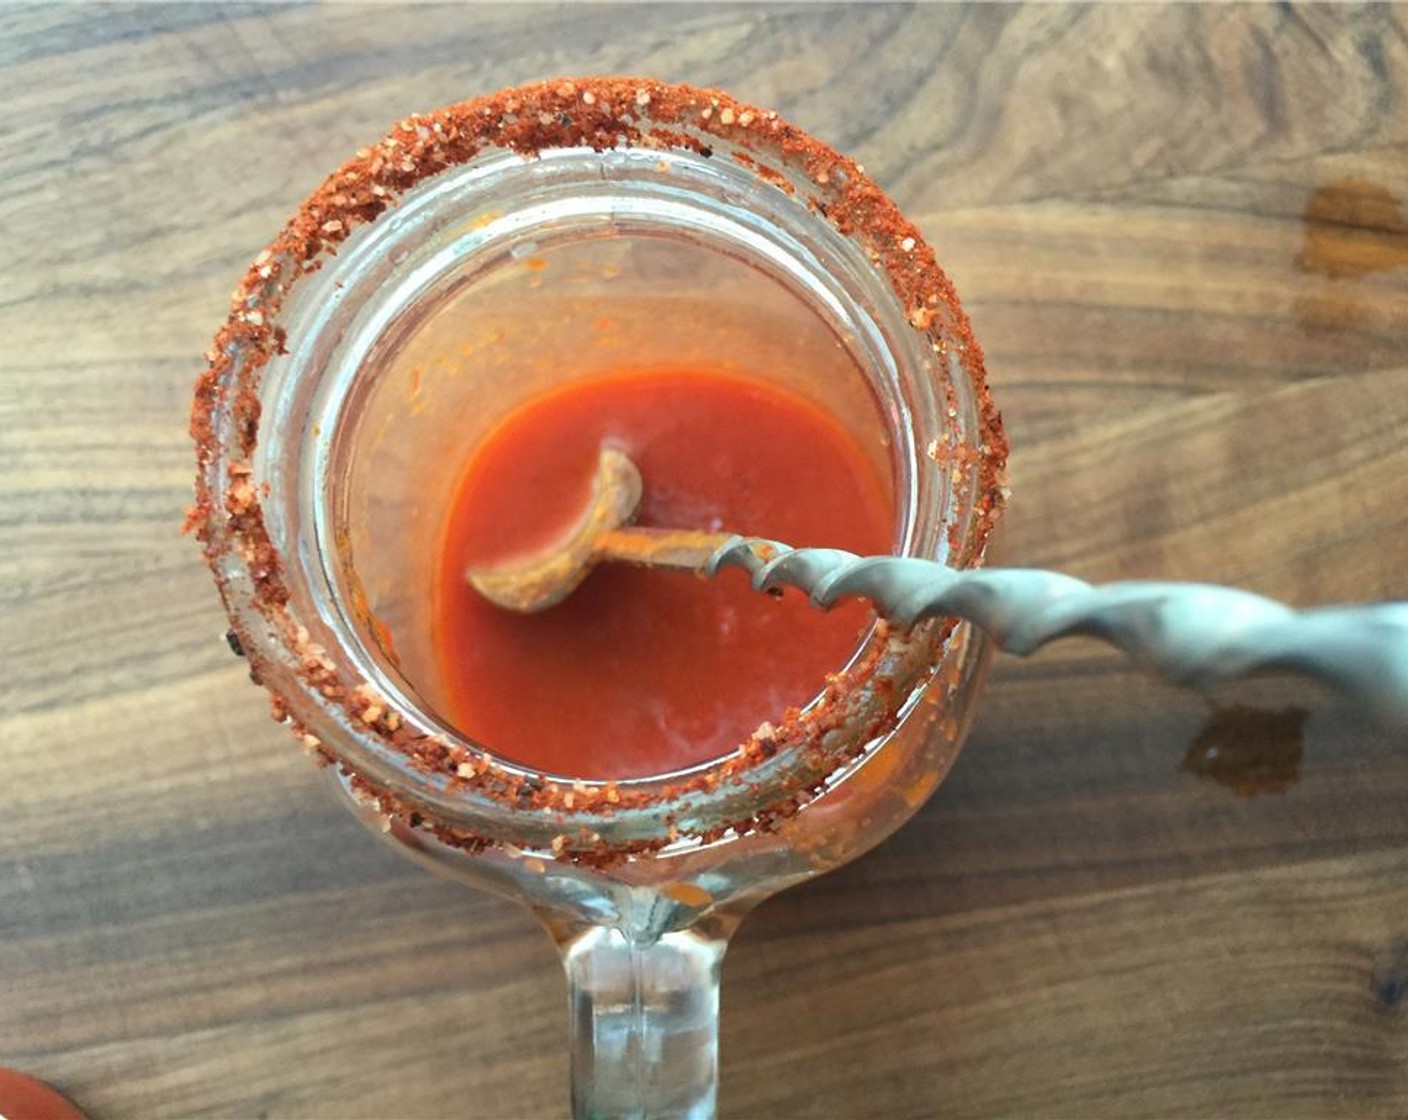 step 3 To the glass, add Tomato Sauce (2 Tbsp), Maggi Seasoning (1/2 tsp), Worcestershire Sauce (1 tsp), Hot Sauce (1 tsp) and the juice from Lime (1). Combine with a bar spoon.